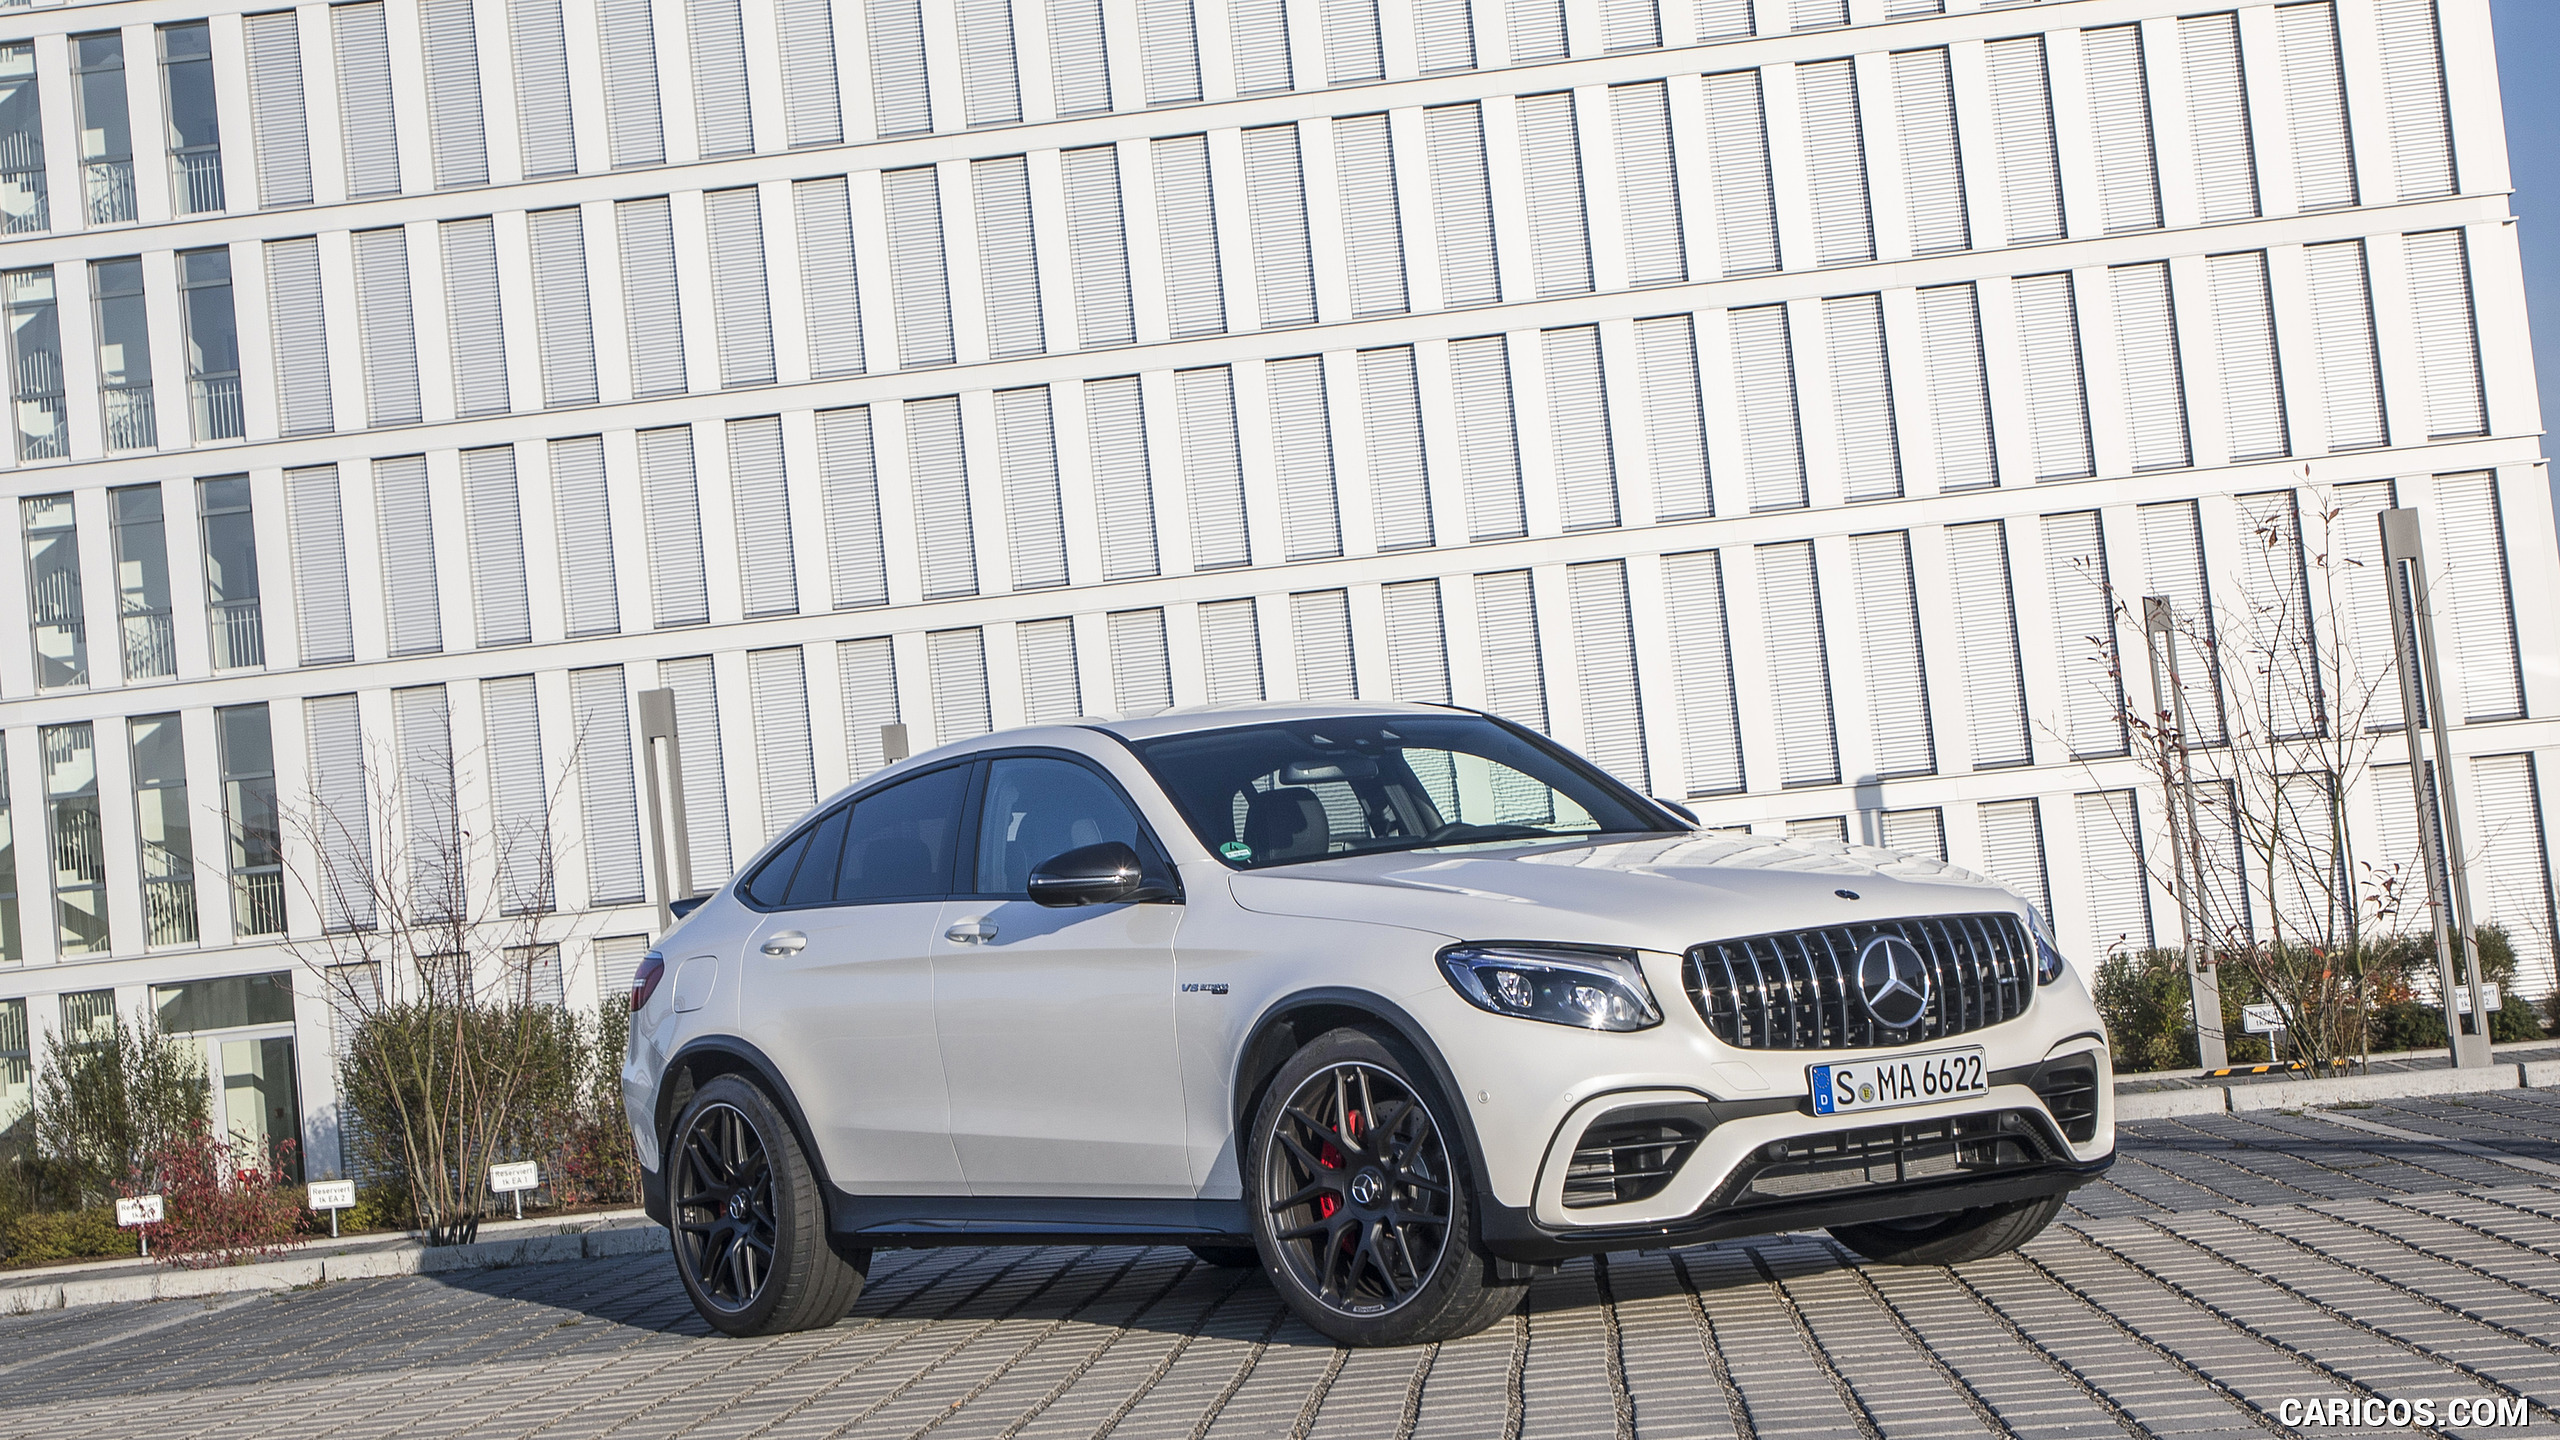 2018 Mercedes-AMG GLC 63 S Coupe - Front Three-Quarter, #51 of 75